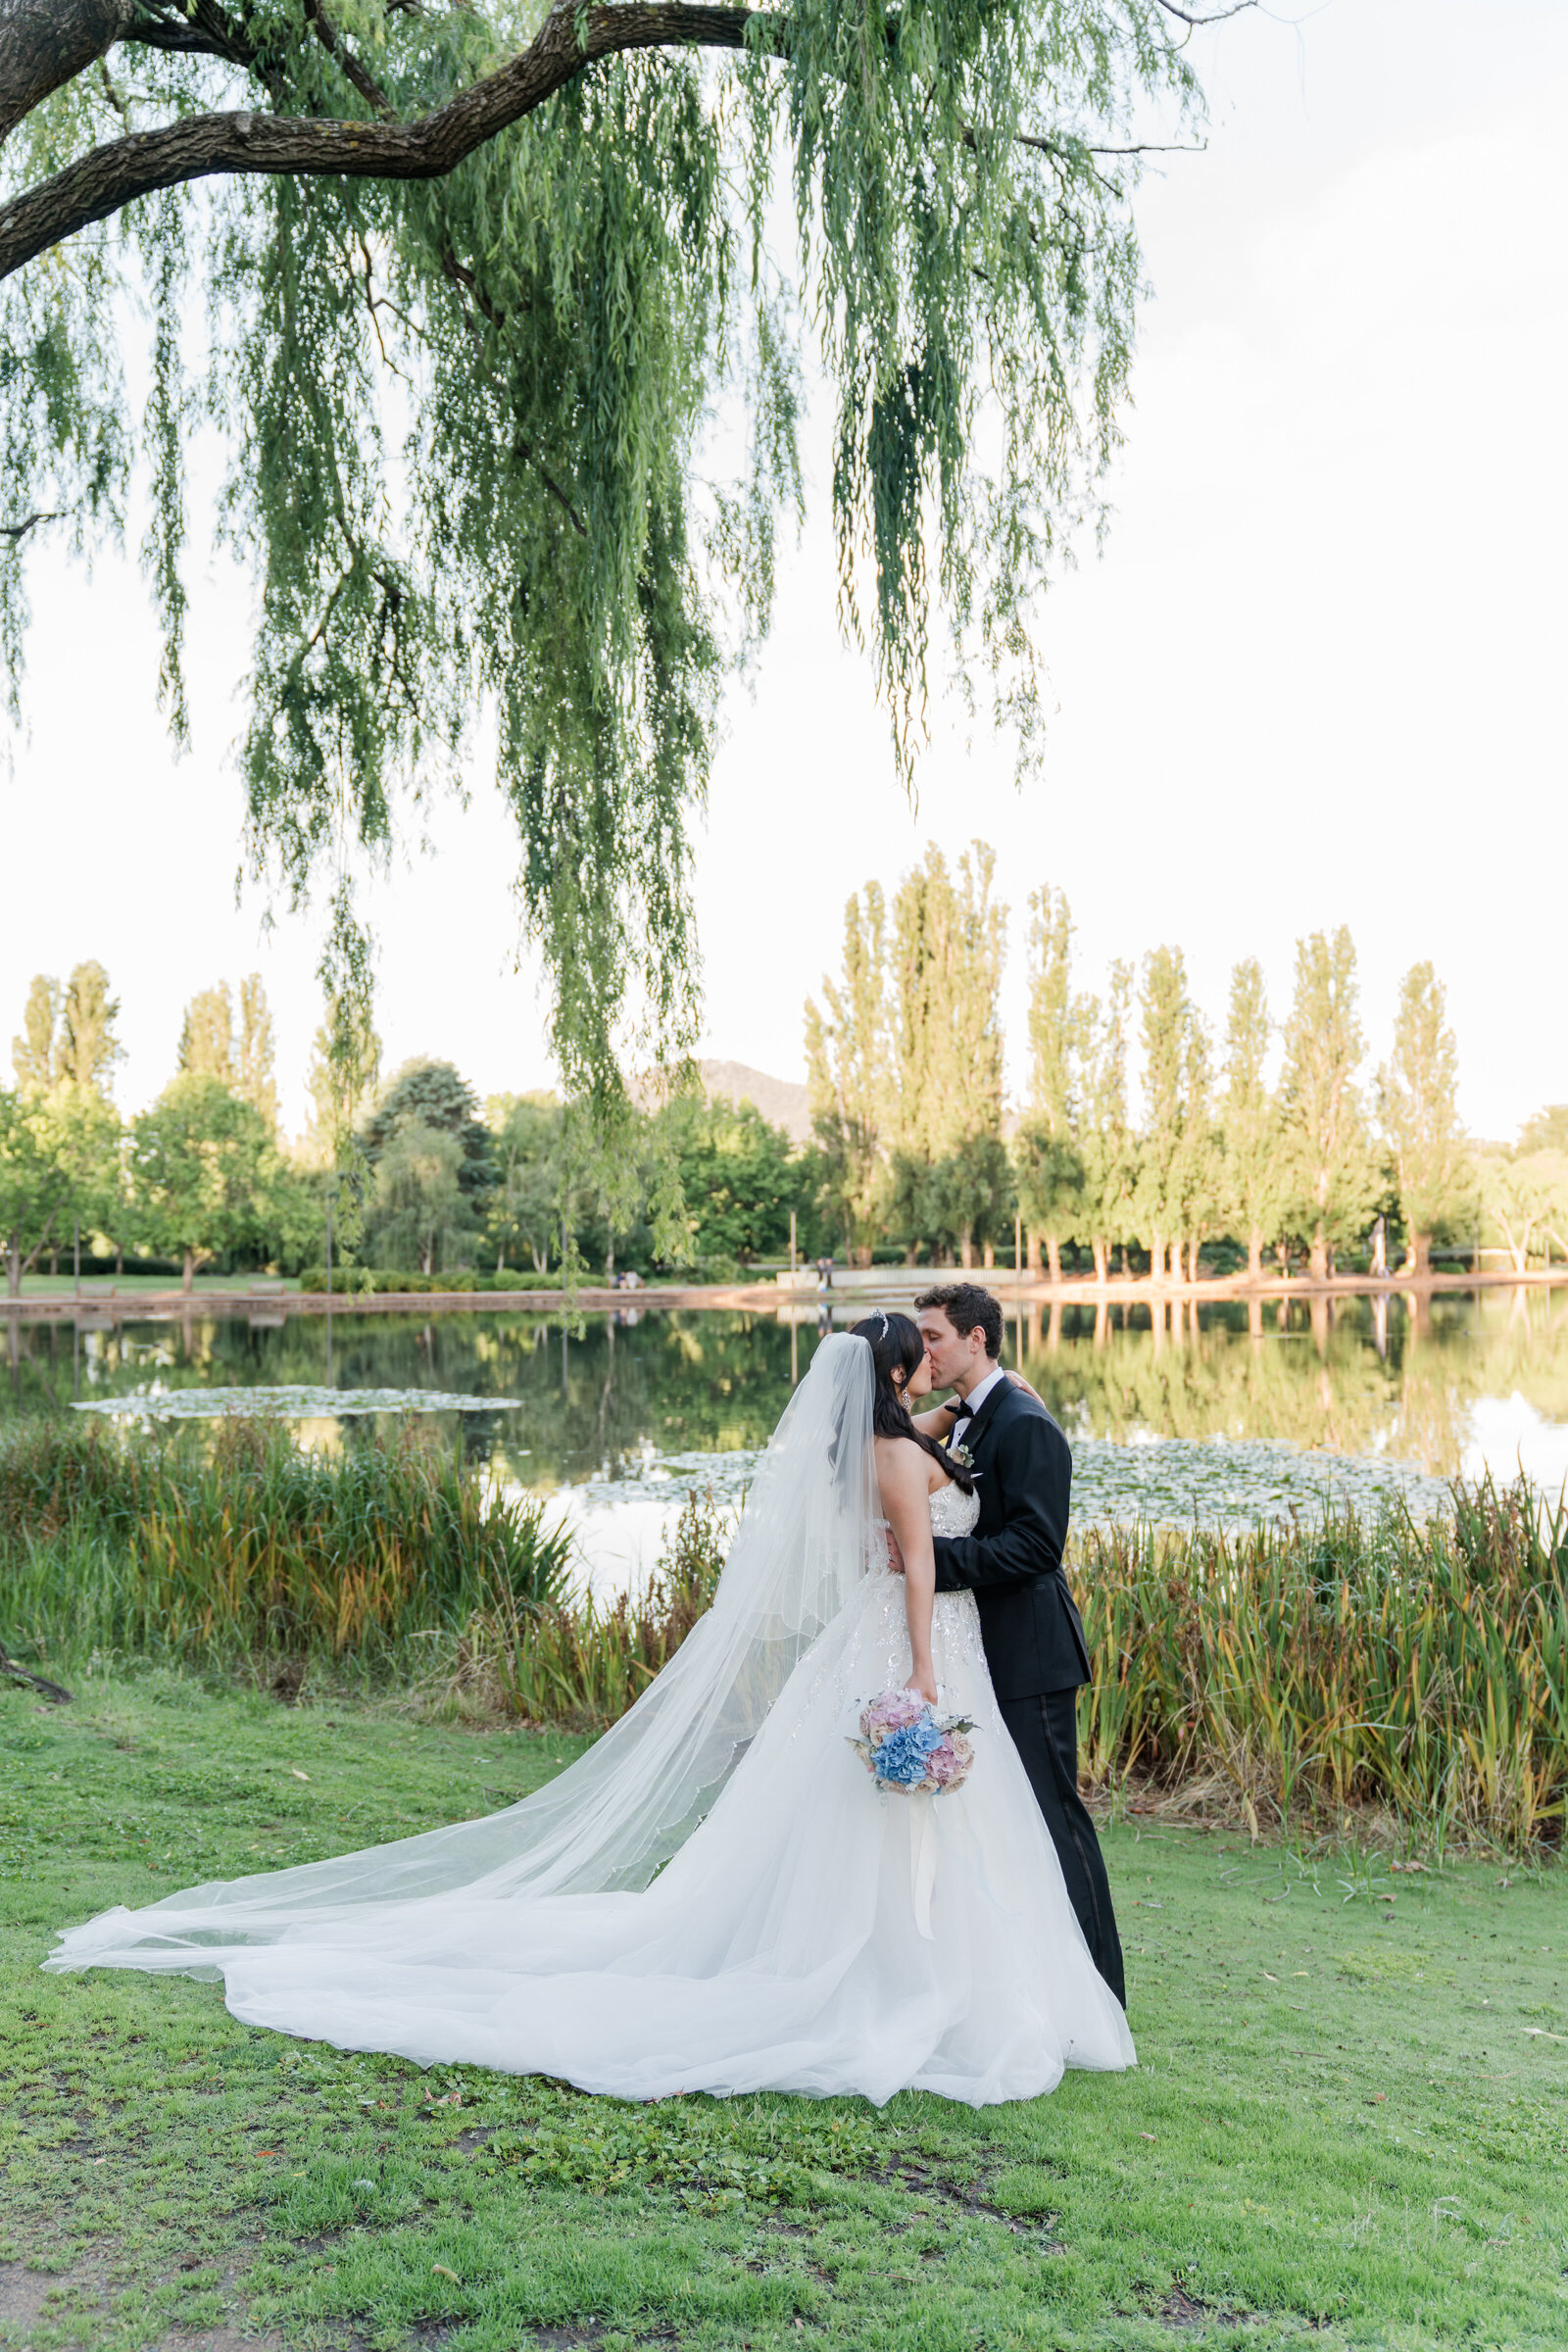 Whimsical wedding day of a Canberra couple